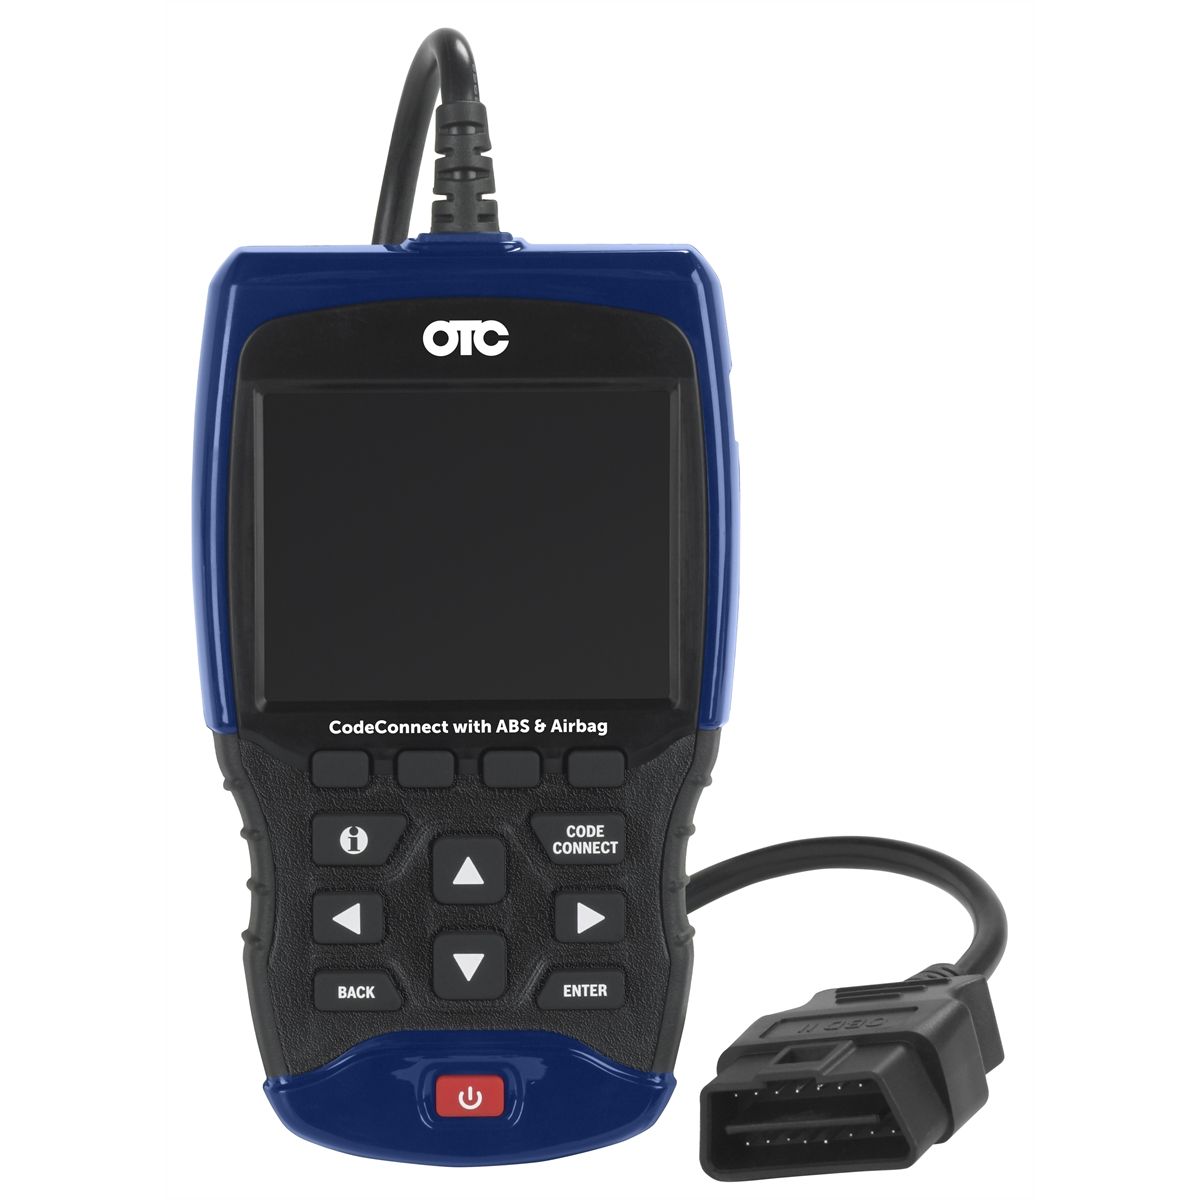 OBD2 Scan Tool - ABS, Air Bag and CodeConnect